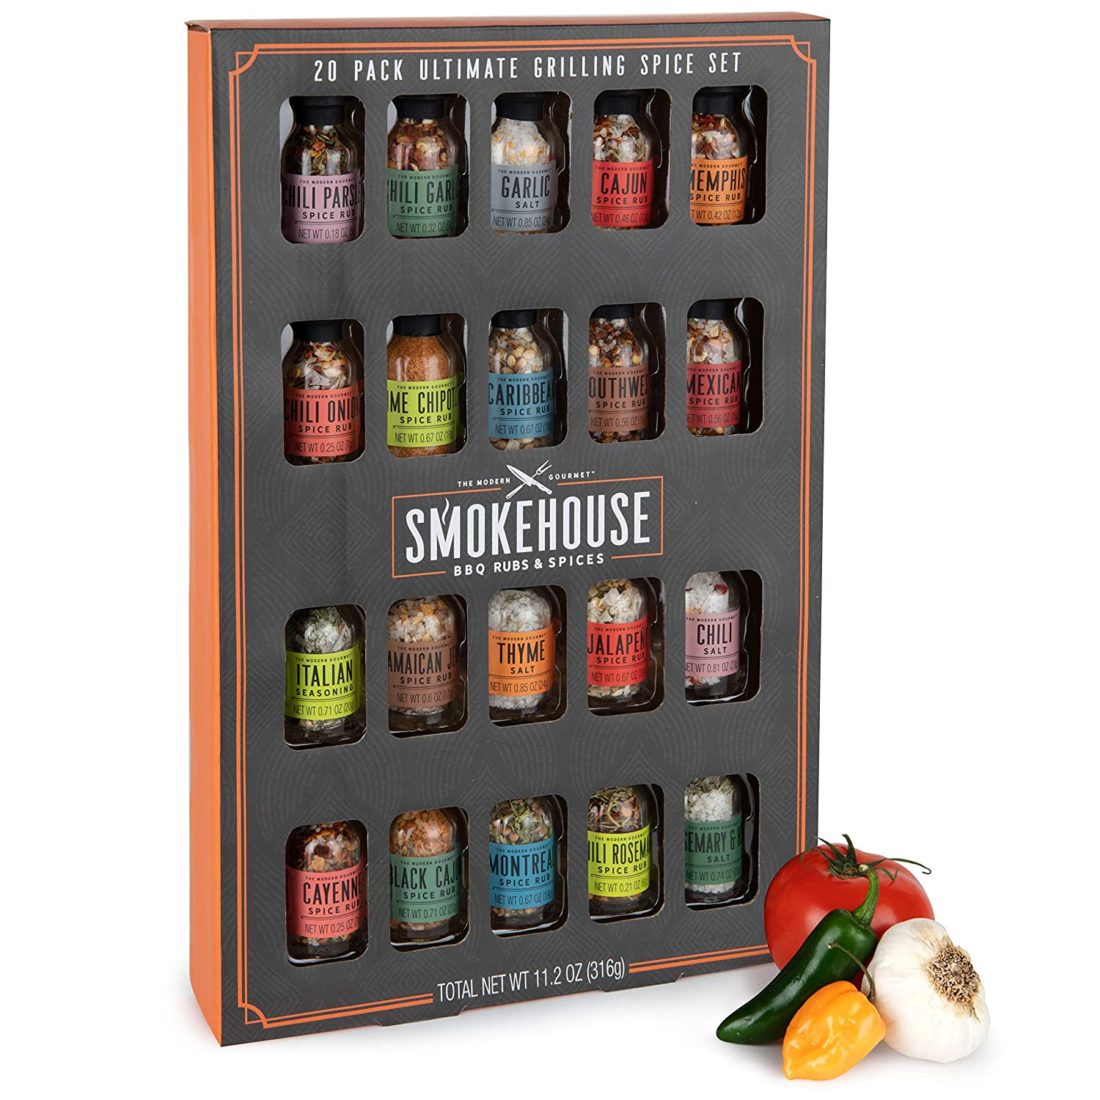 Thoughtfully Gifts, Smokehouse Ultimate Grilling Spice Set